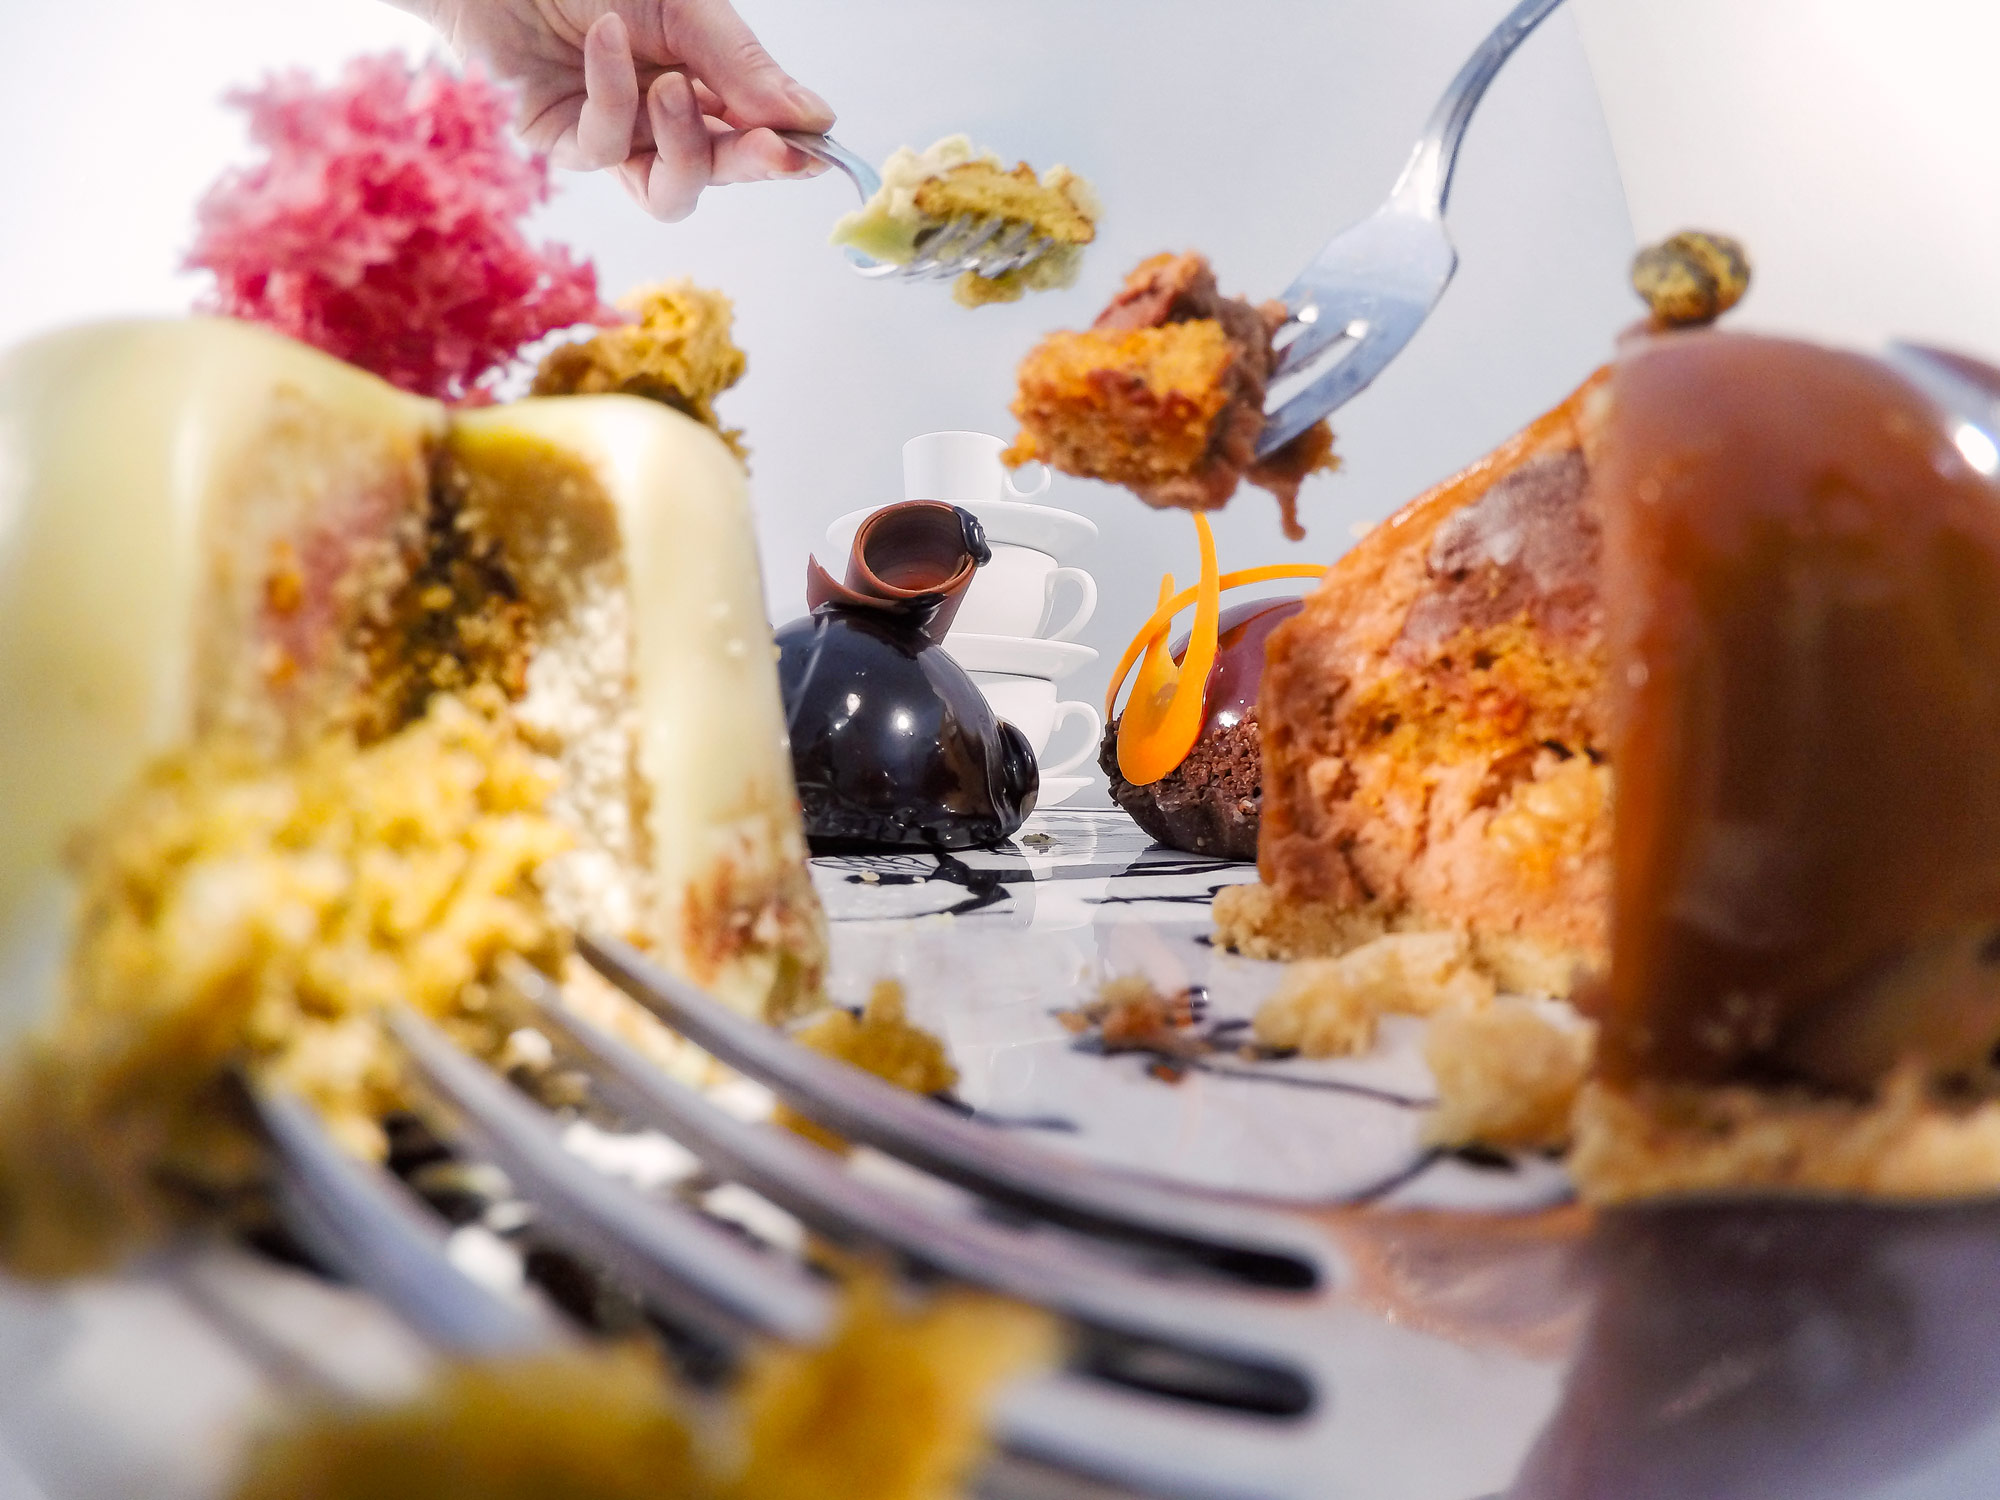 Inside food photo series, depicting a close up view of cakes and forks. From the point of view of the cake as standing on a table in the middle of a cake party, surrounded by forks, cakes and cups with chunks of cakes being forked through the air.